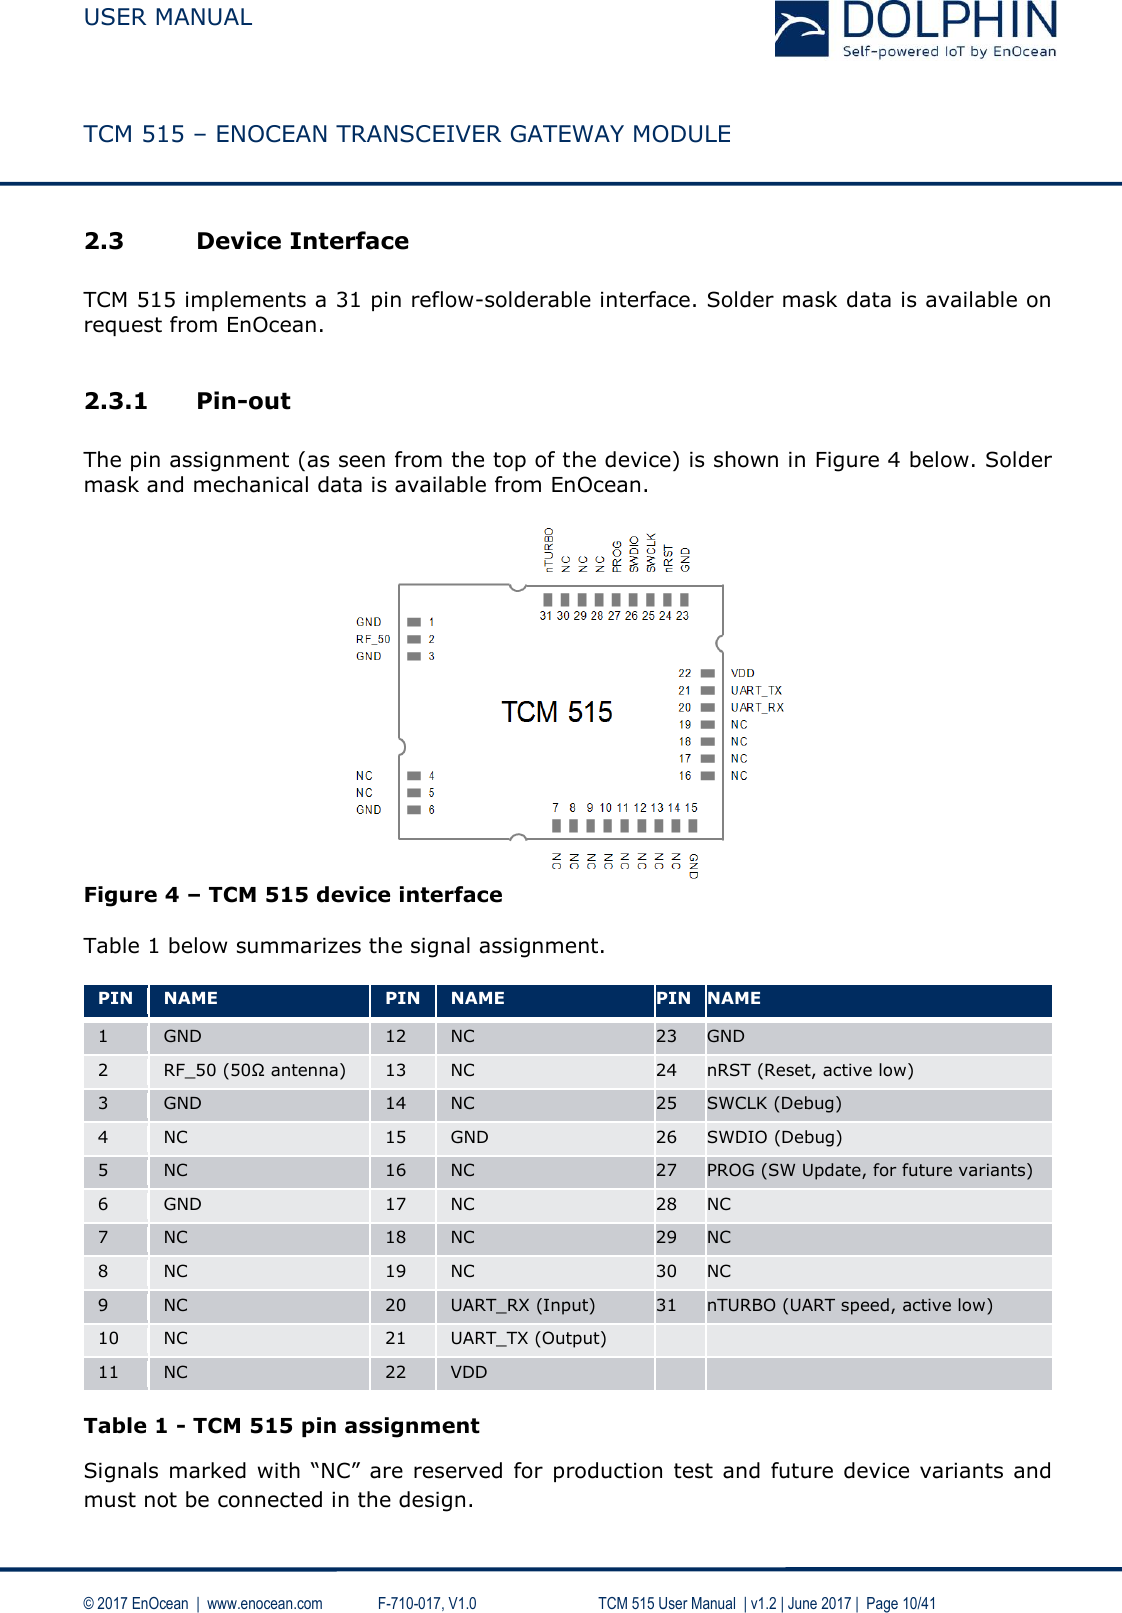  USER MANUAL    TCM 515 – ENOCEAN TRANSCEIVER GATEWAY MODULE  © 2017 EnOcean  |  www.enocean.com   F-710-017, V1.0        TCM 515 User Manual  | v1.2 | June 2017 |  Page 10/41  2.3 Device Interface  TCM 515 implements a 31 pin reflow-solderable interface. Solder mask data is available on request from EnOcean.   2.3.1 Pin-out  The pin assignment (as seen from the top of the device) is shown in Figure 4 below. Solder mask and mechanical data is available from EnOcean.   Figure 4 – TCM 515 device interface  Table 1 below summarizes the signal assignment.  PIN  NAME  PIN  NAME  PIN  NAME  1  GND  12  NC 23  GND 2 RF_50 (50Ω antenna) 13  NC 24  nRST (Reset, active low) 3 GND 14 NC  25 SWCLK (Debug) 4 NC  15 GND  26  SWDIO (Debug) 5 NC 16  NC 27 PROG (SW Update, for future variants)  6 GND 17  NC 28  NC  7  NC 18 NC 29 NC  8  NC 19 NC  30 NC 9 NC  20  UART_RX (Input) 31  nTURBO (UART speed, active low) 10 NC  21  UART_TX (Output)   11 NC  22 VDD    Table 1 - TCM 515 pin assignment  Signals marked with “NC” are reserved  for  production test and future device variants and must not be connected in the design.   